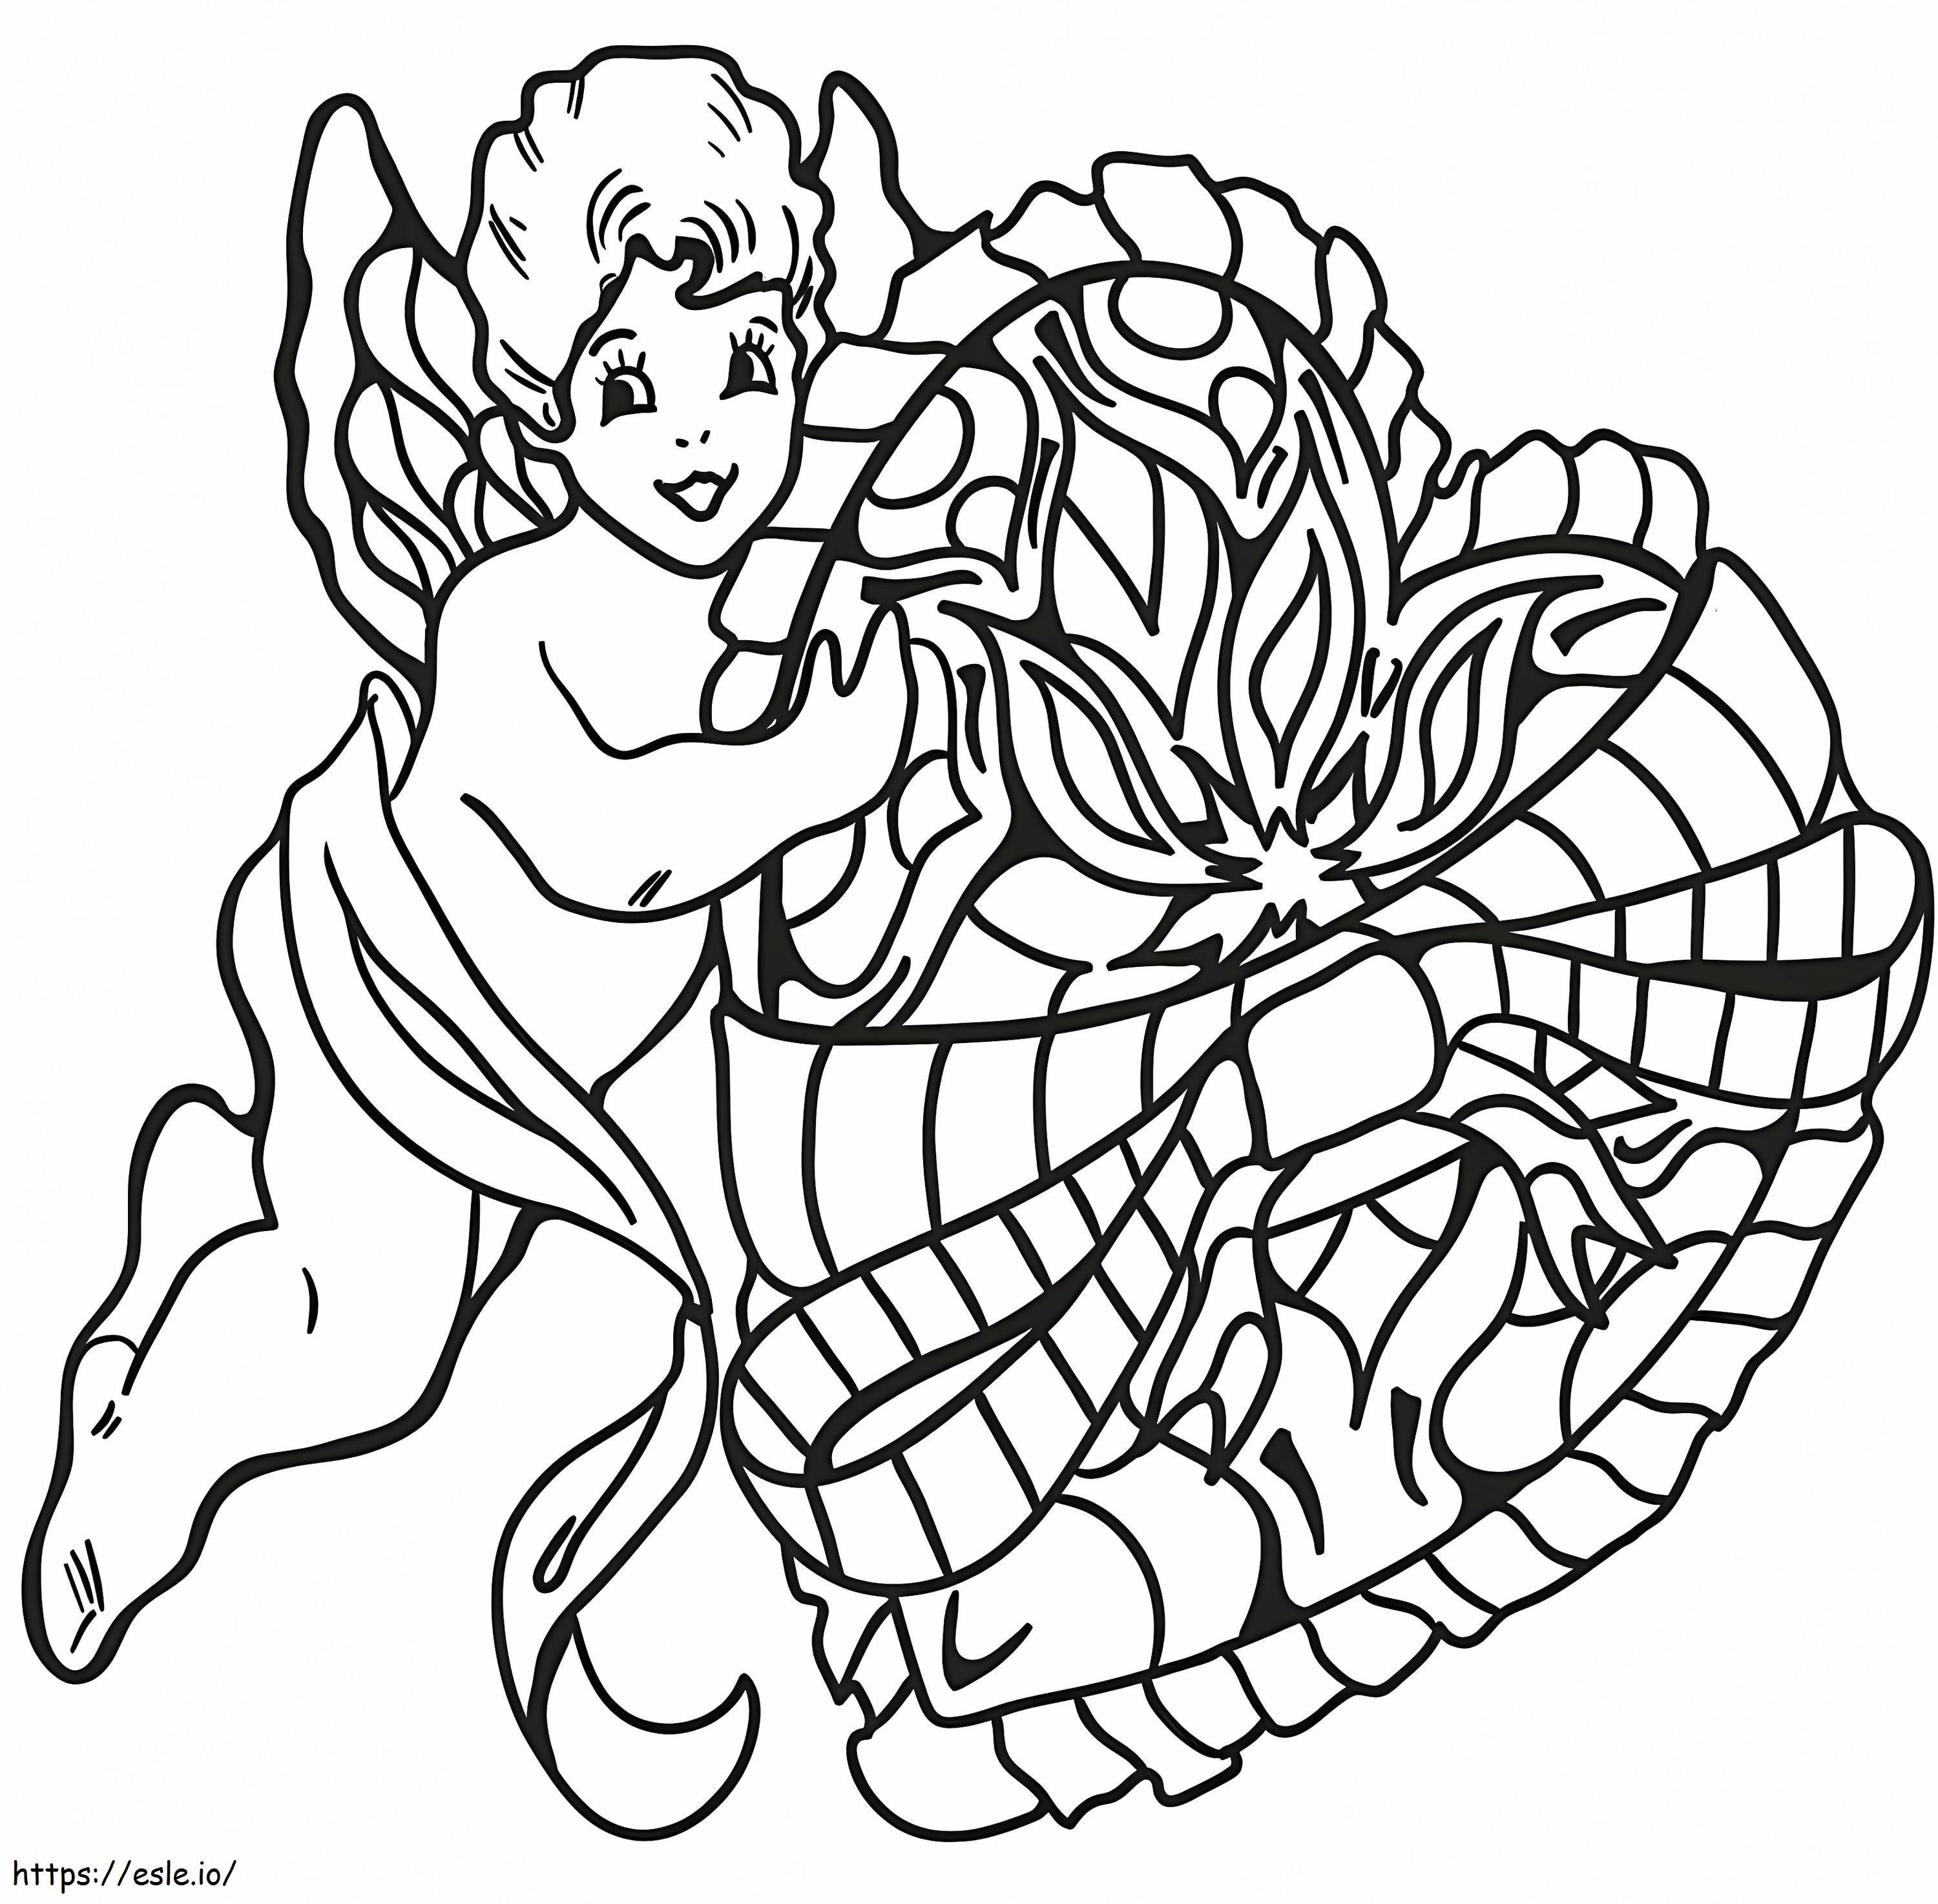 Cupid With Heart coloring page